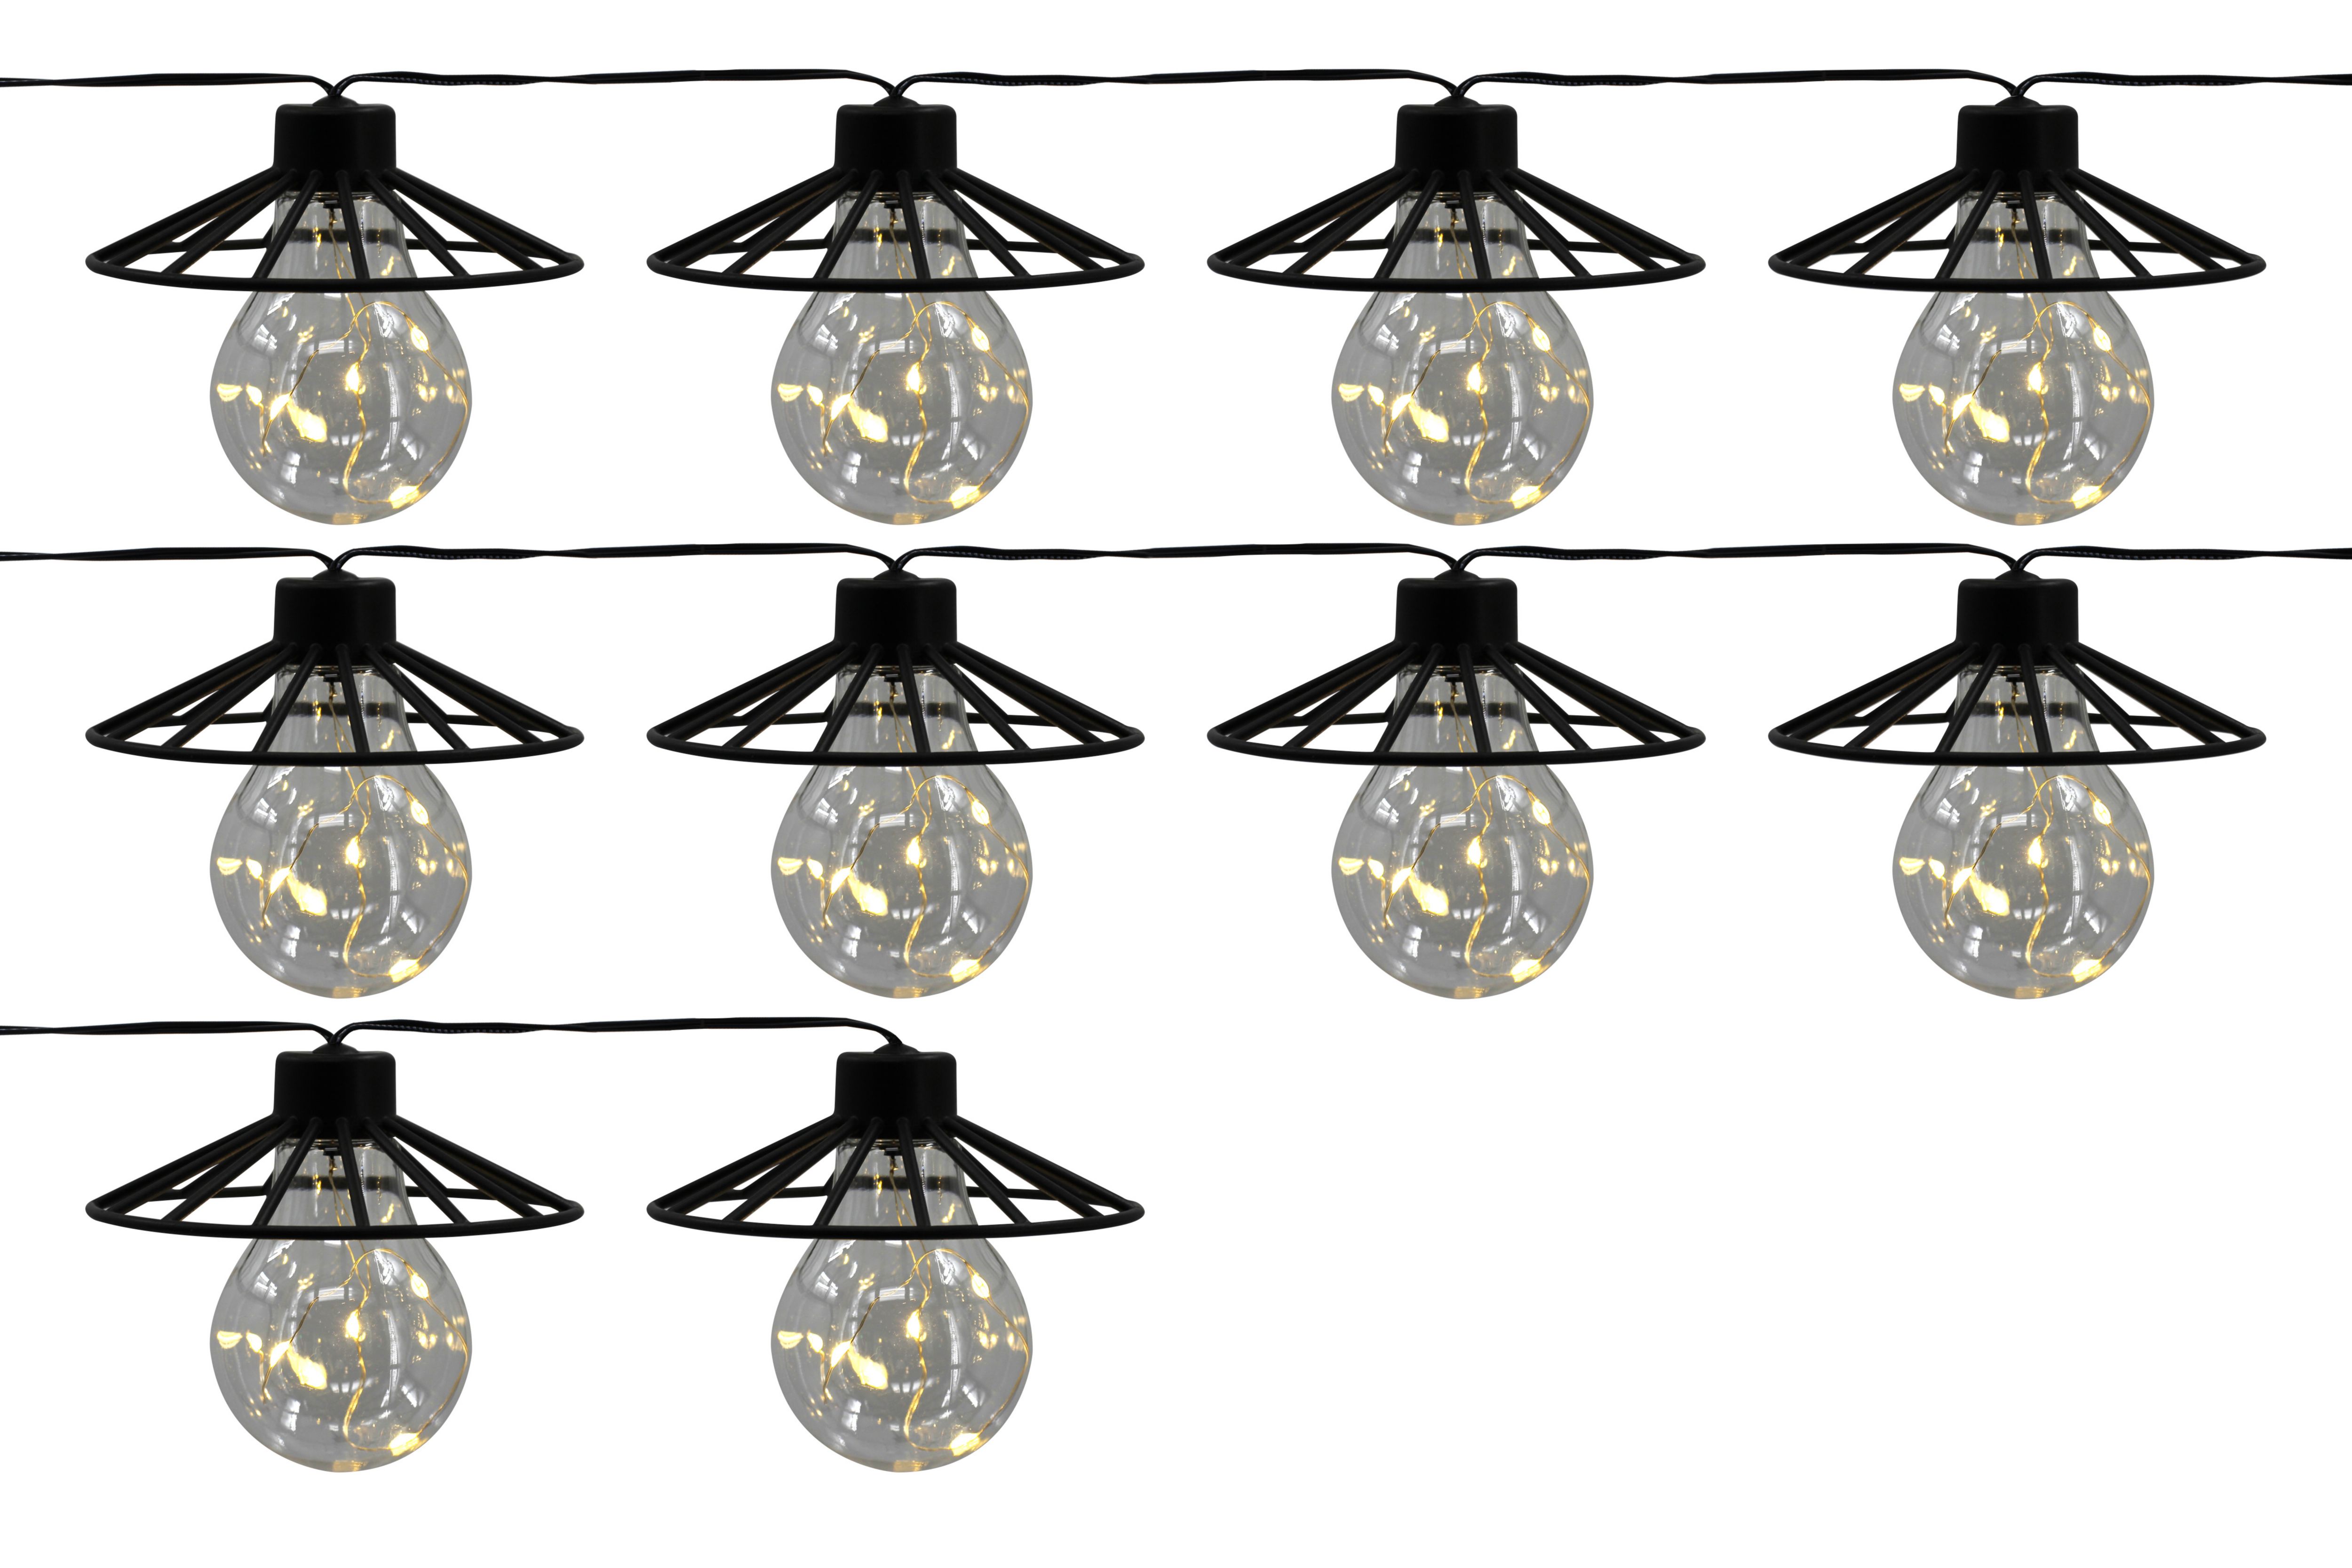 Cupabia Solar-powered Warm white 10 Integrated LED Outdoor String lights